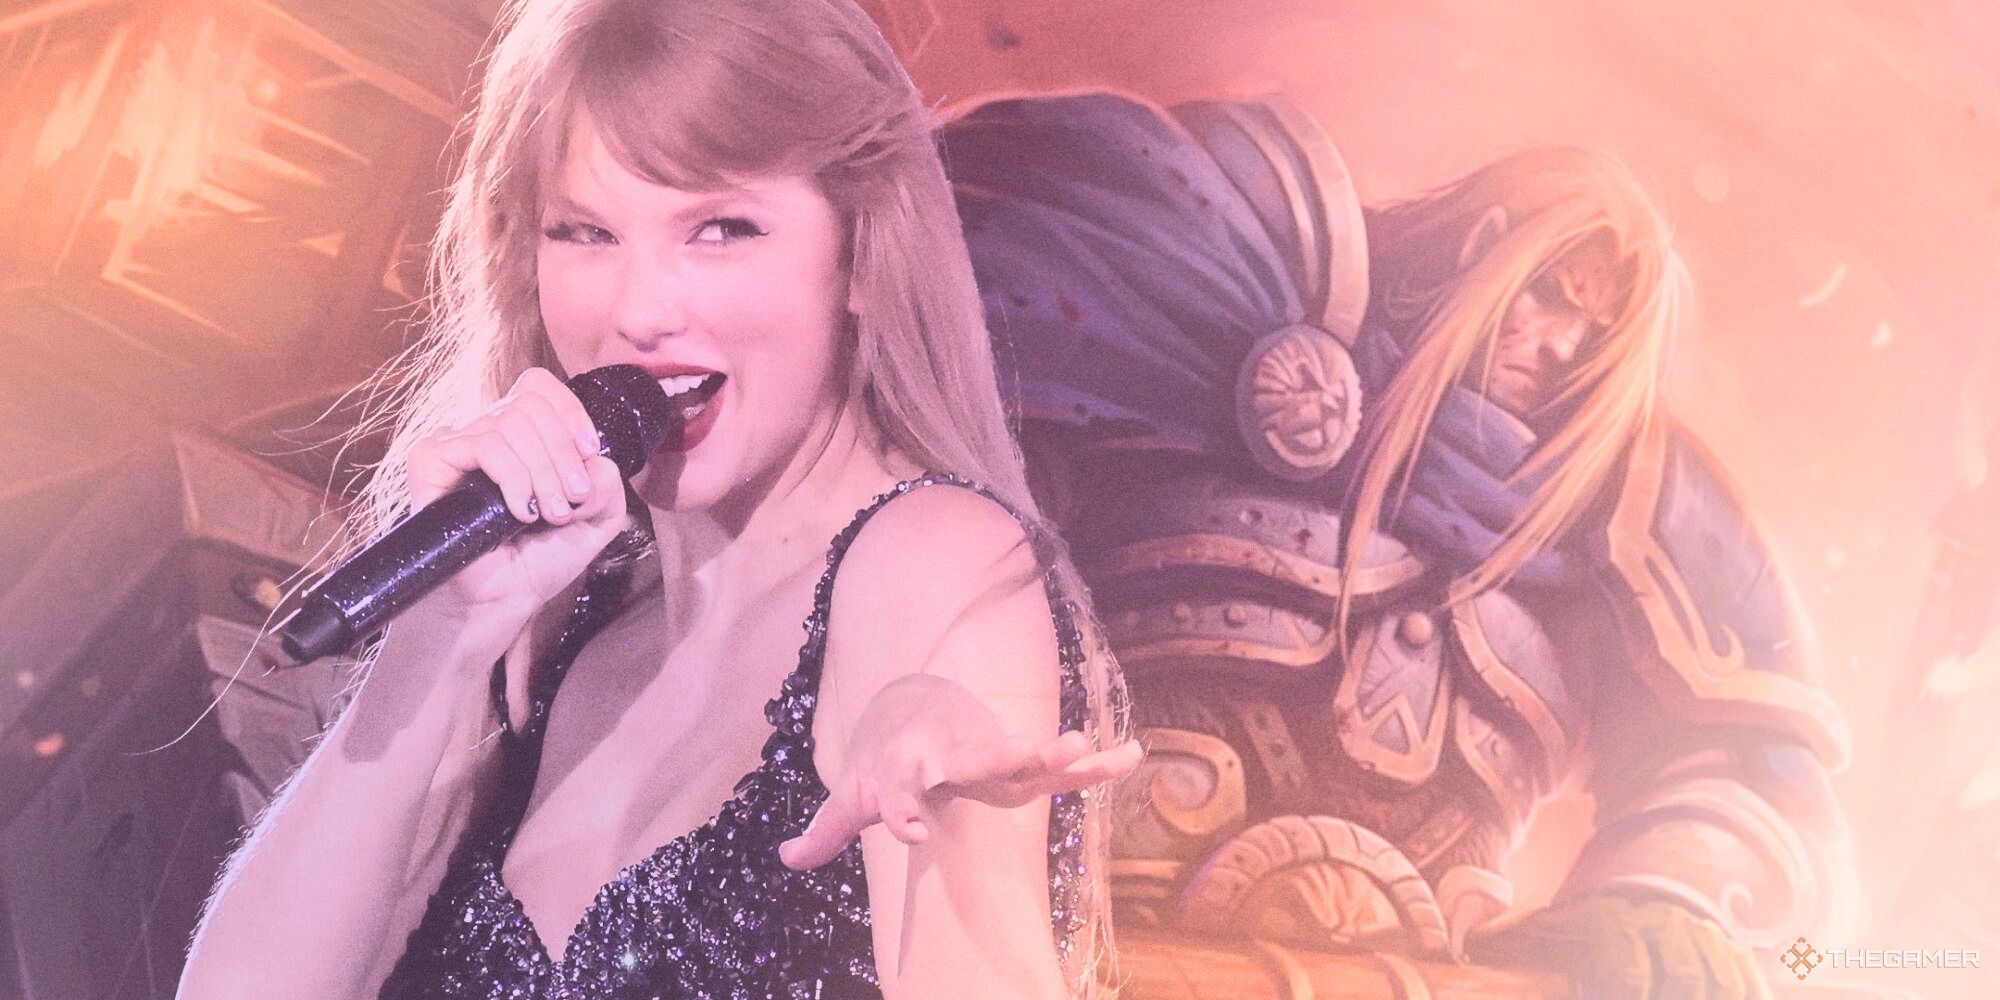 Taylor swift waving goodbye with a sad DND character in the background